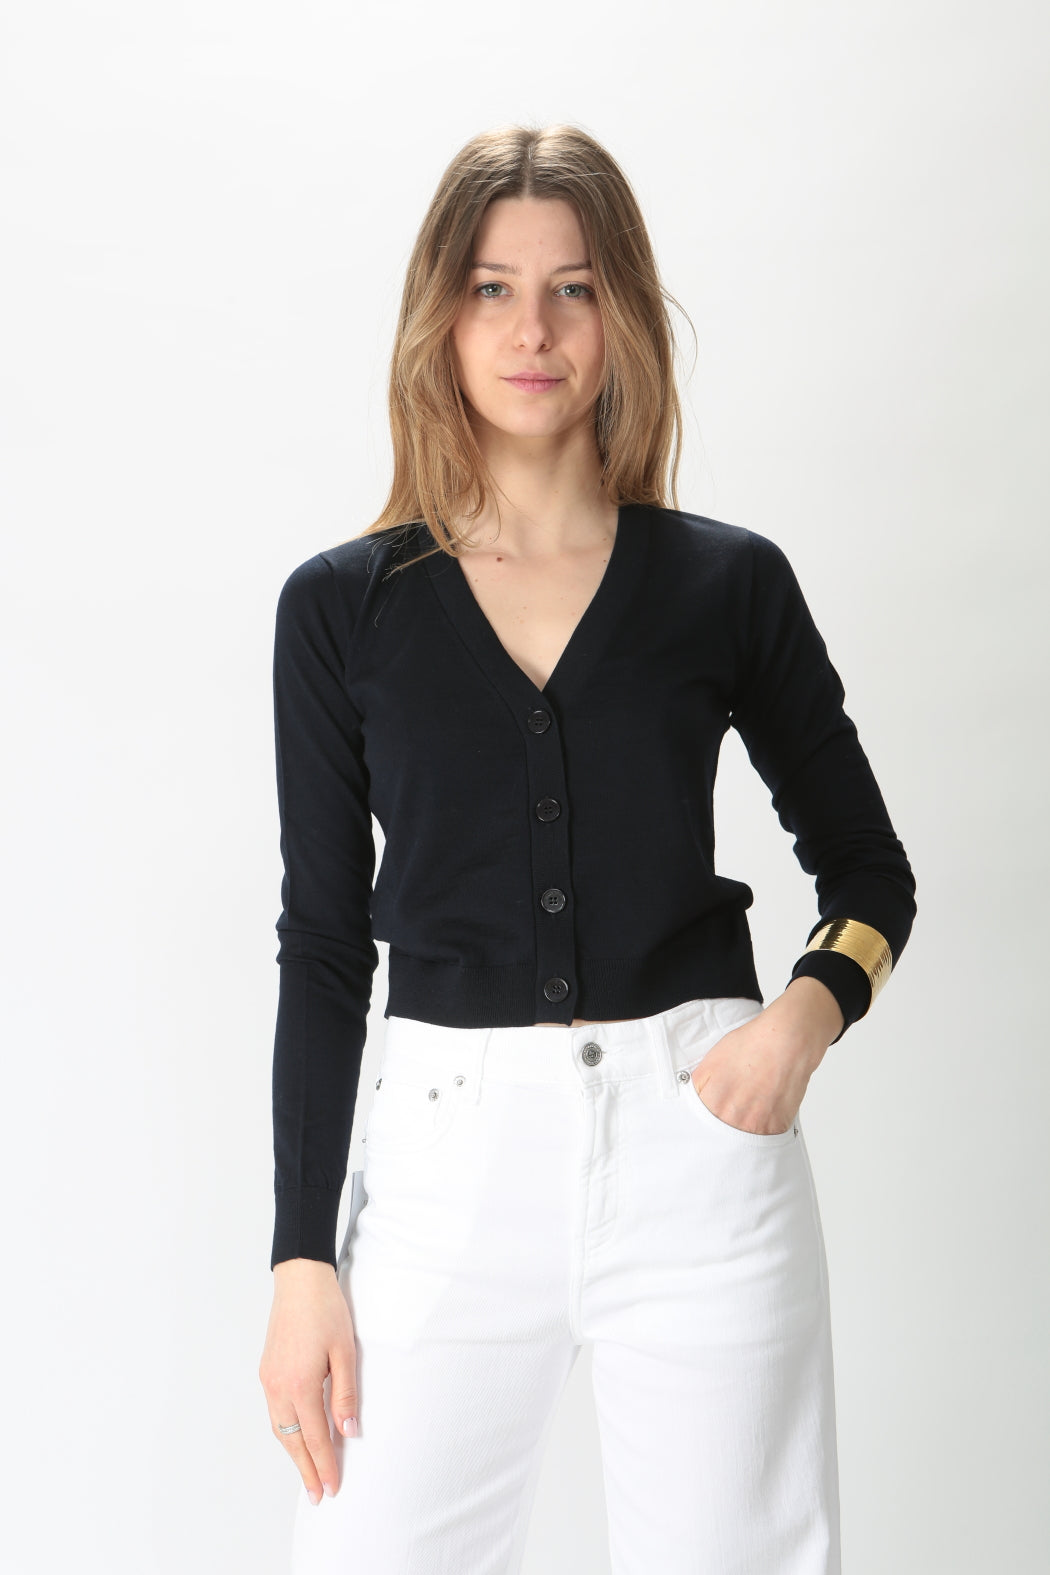 https://admin.shopify.com/store/gulieshop/products/9042020663645#:~:text=Invia-,R.%20Collina%20Cardigan%20cropped%20T03010,-Contenuto%20multimediale%201